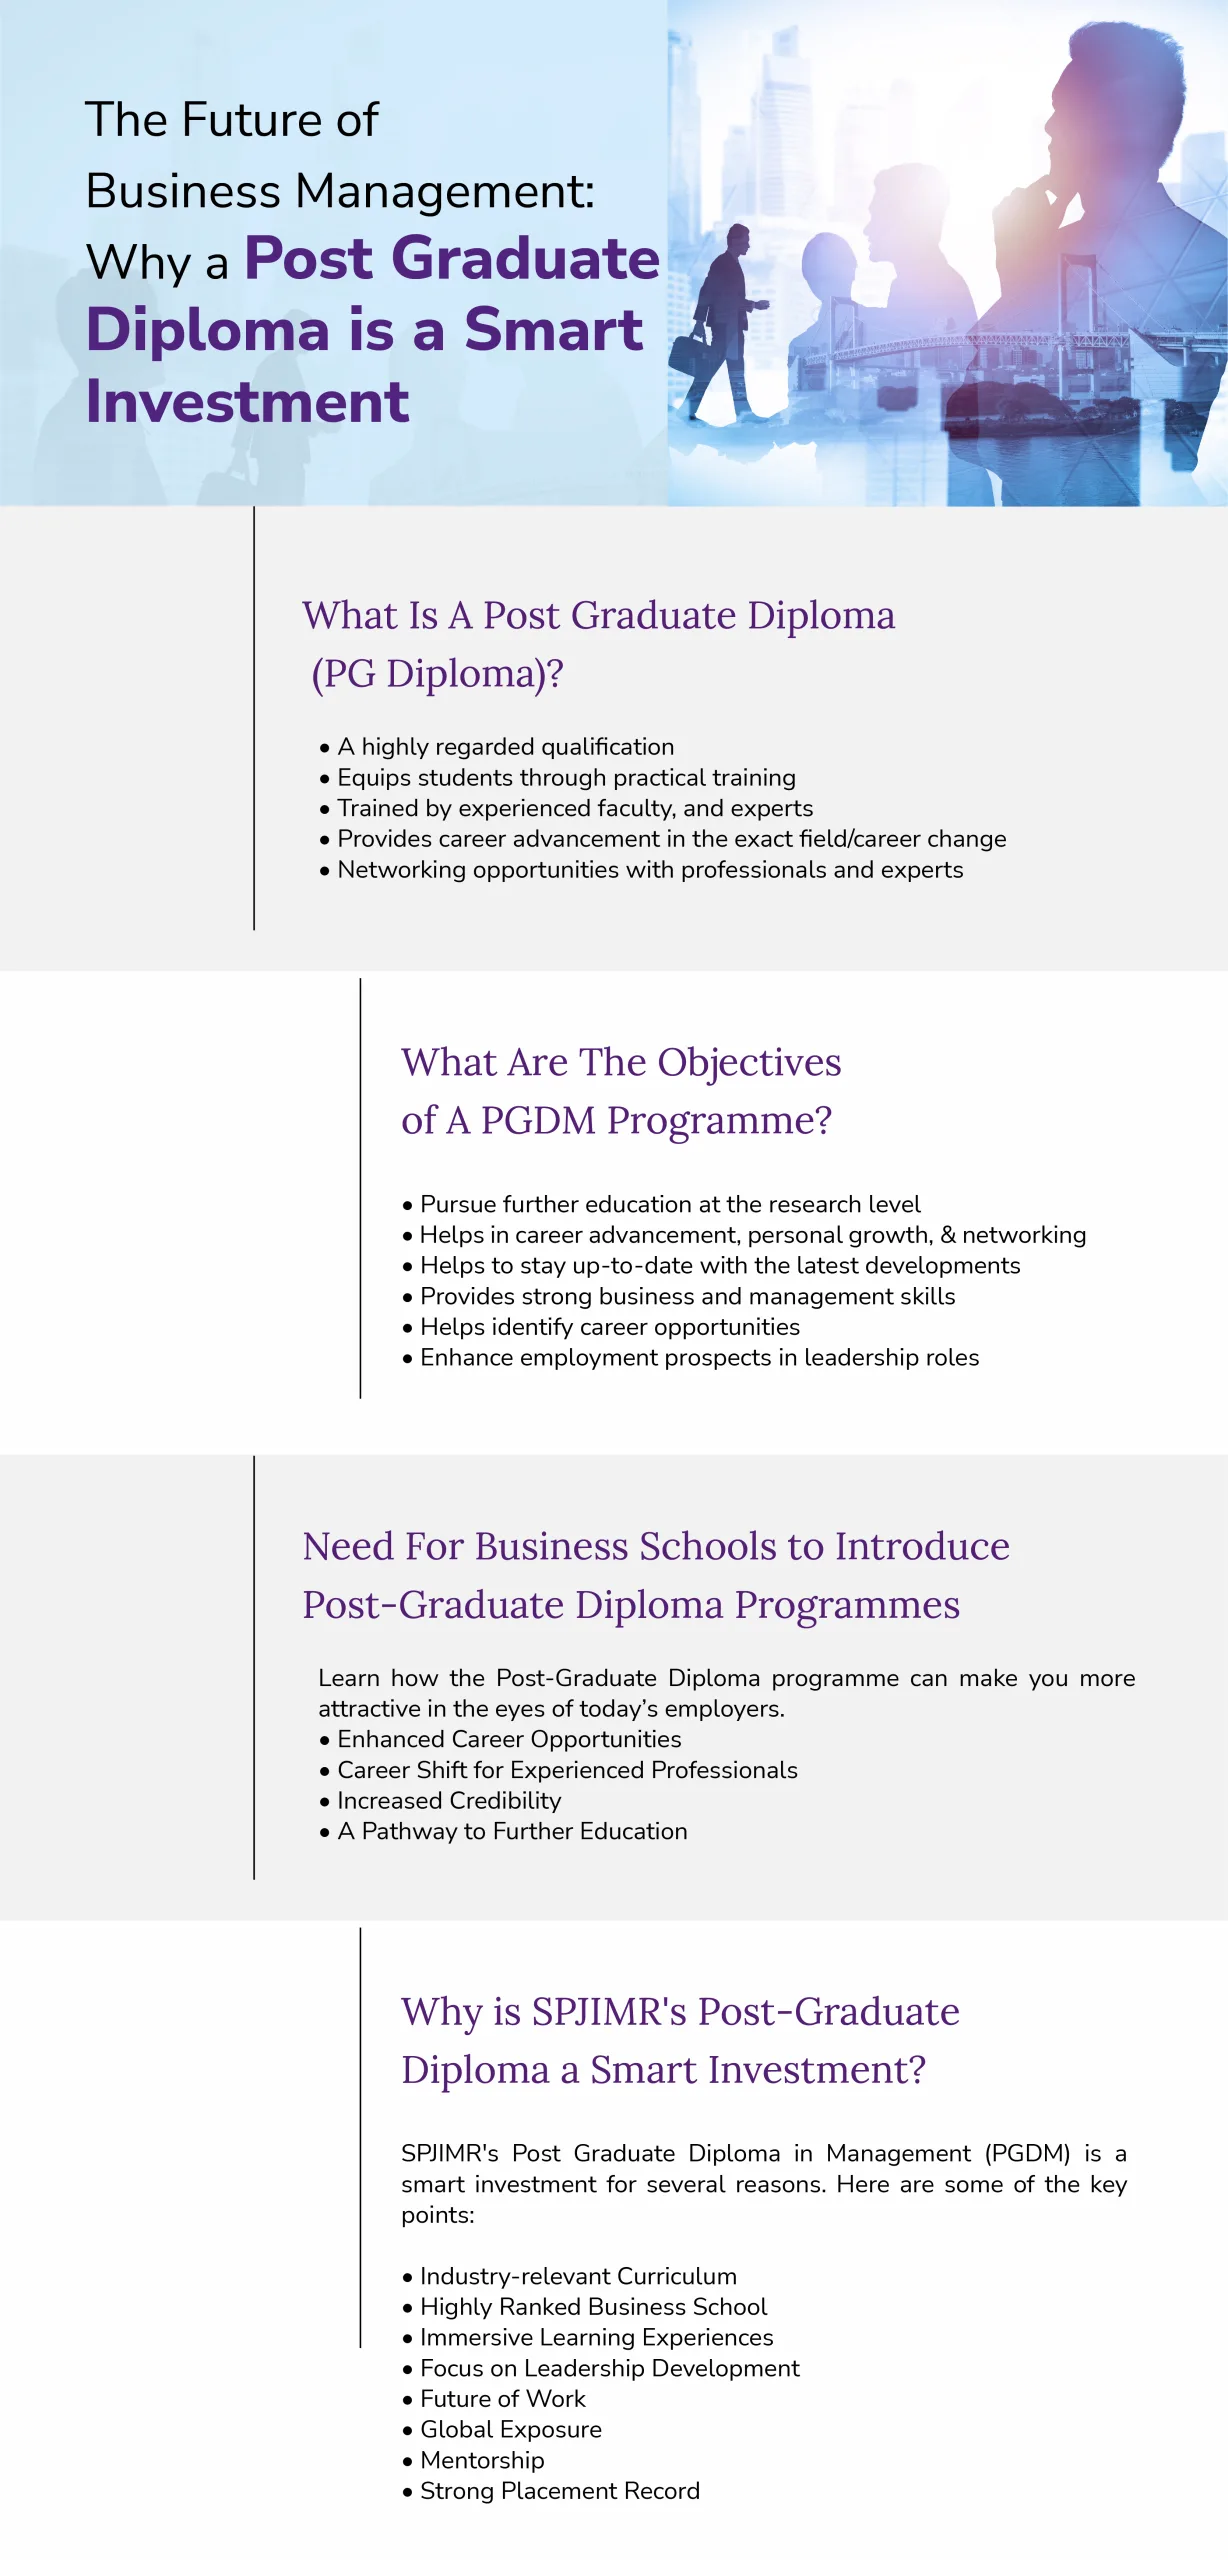 Why a Post Graduate Diploma is a Smart Investment